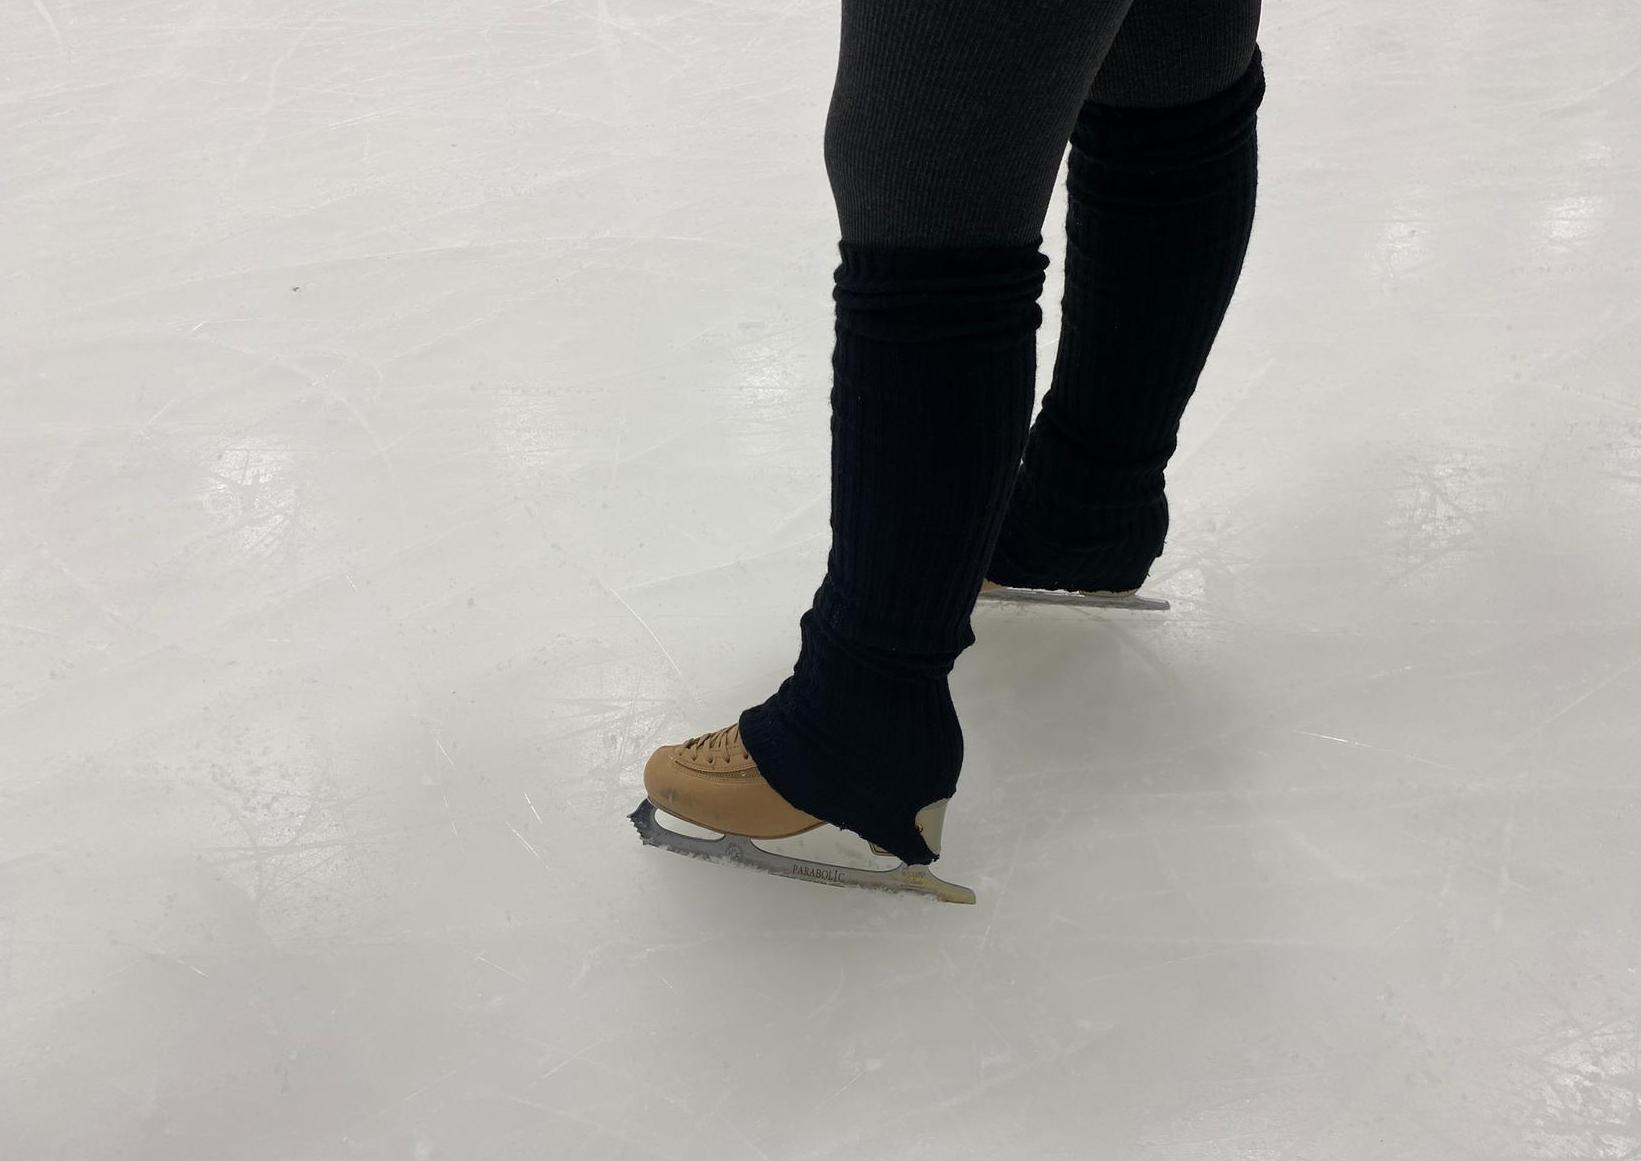 Skating sessions start from 7.10 pounds during off-peak times and 8.50 pounds during peak times. For non-members, it's an extra 2.20 pounds on top